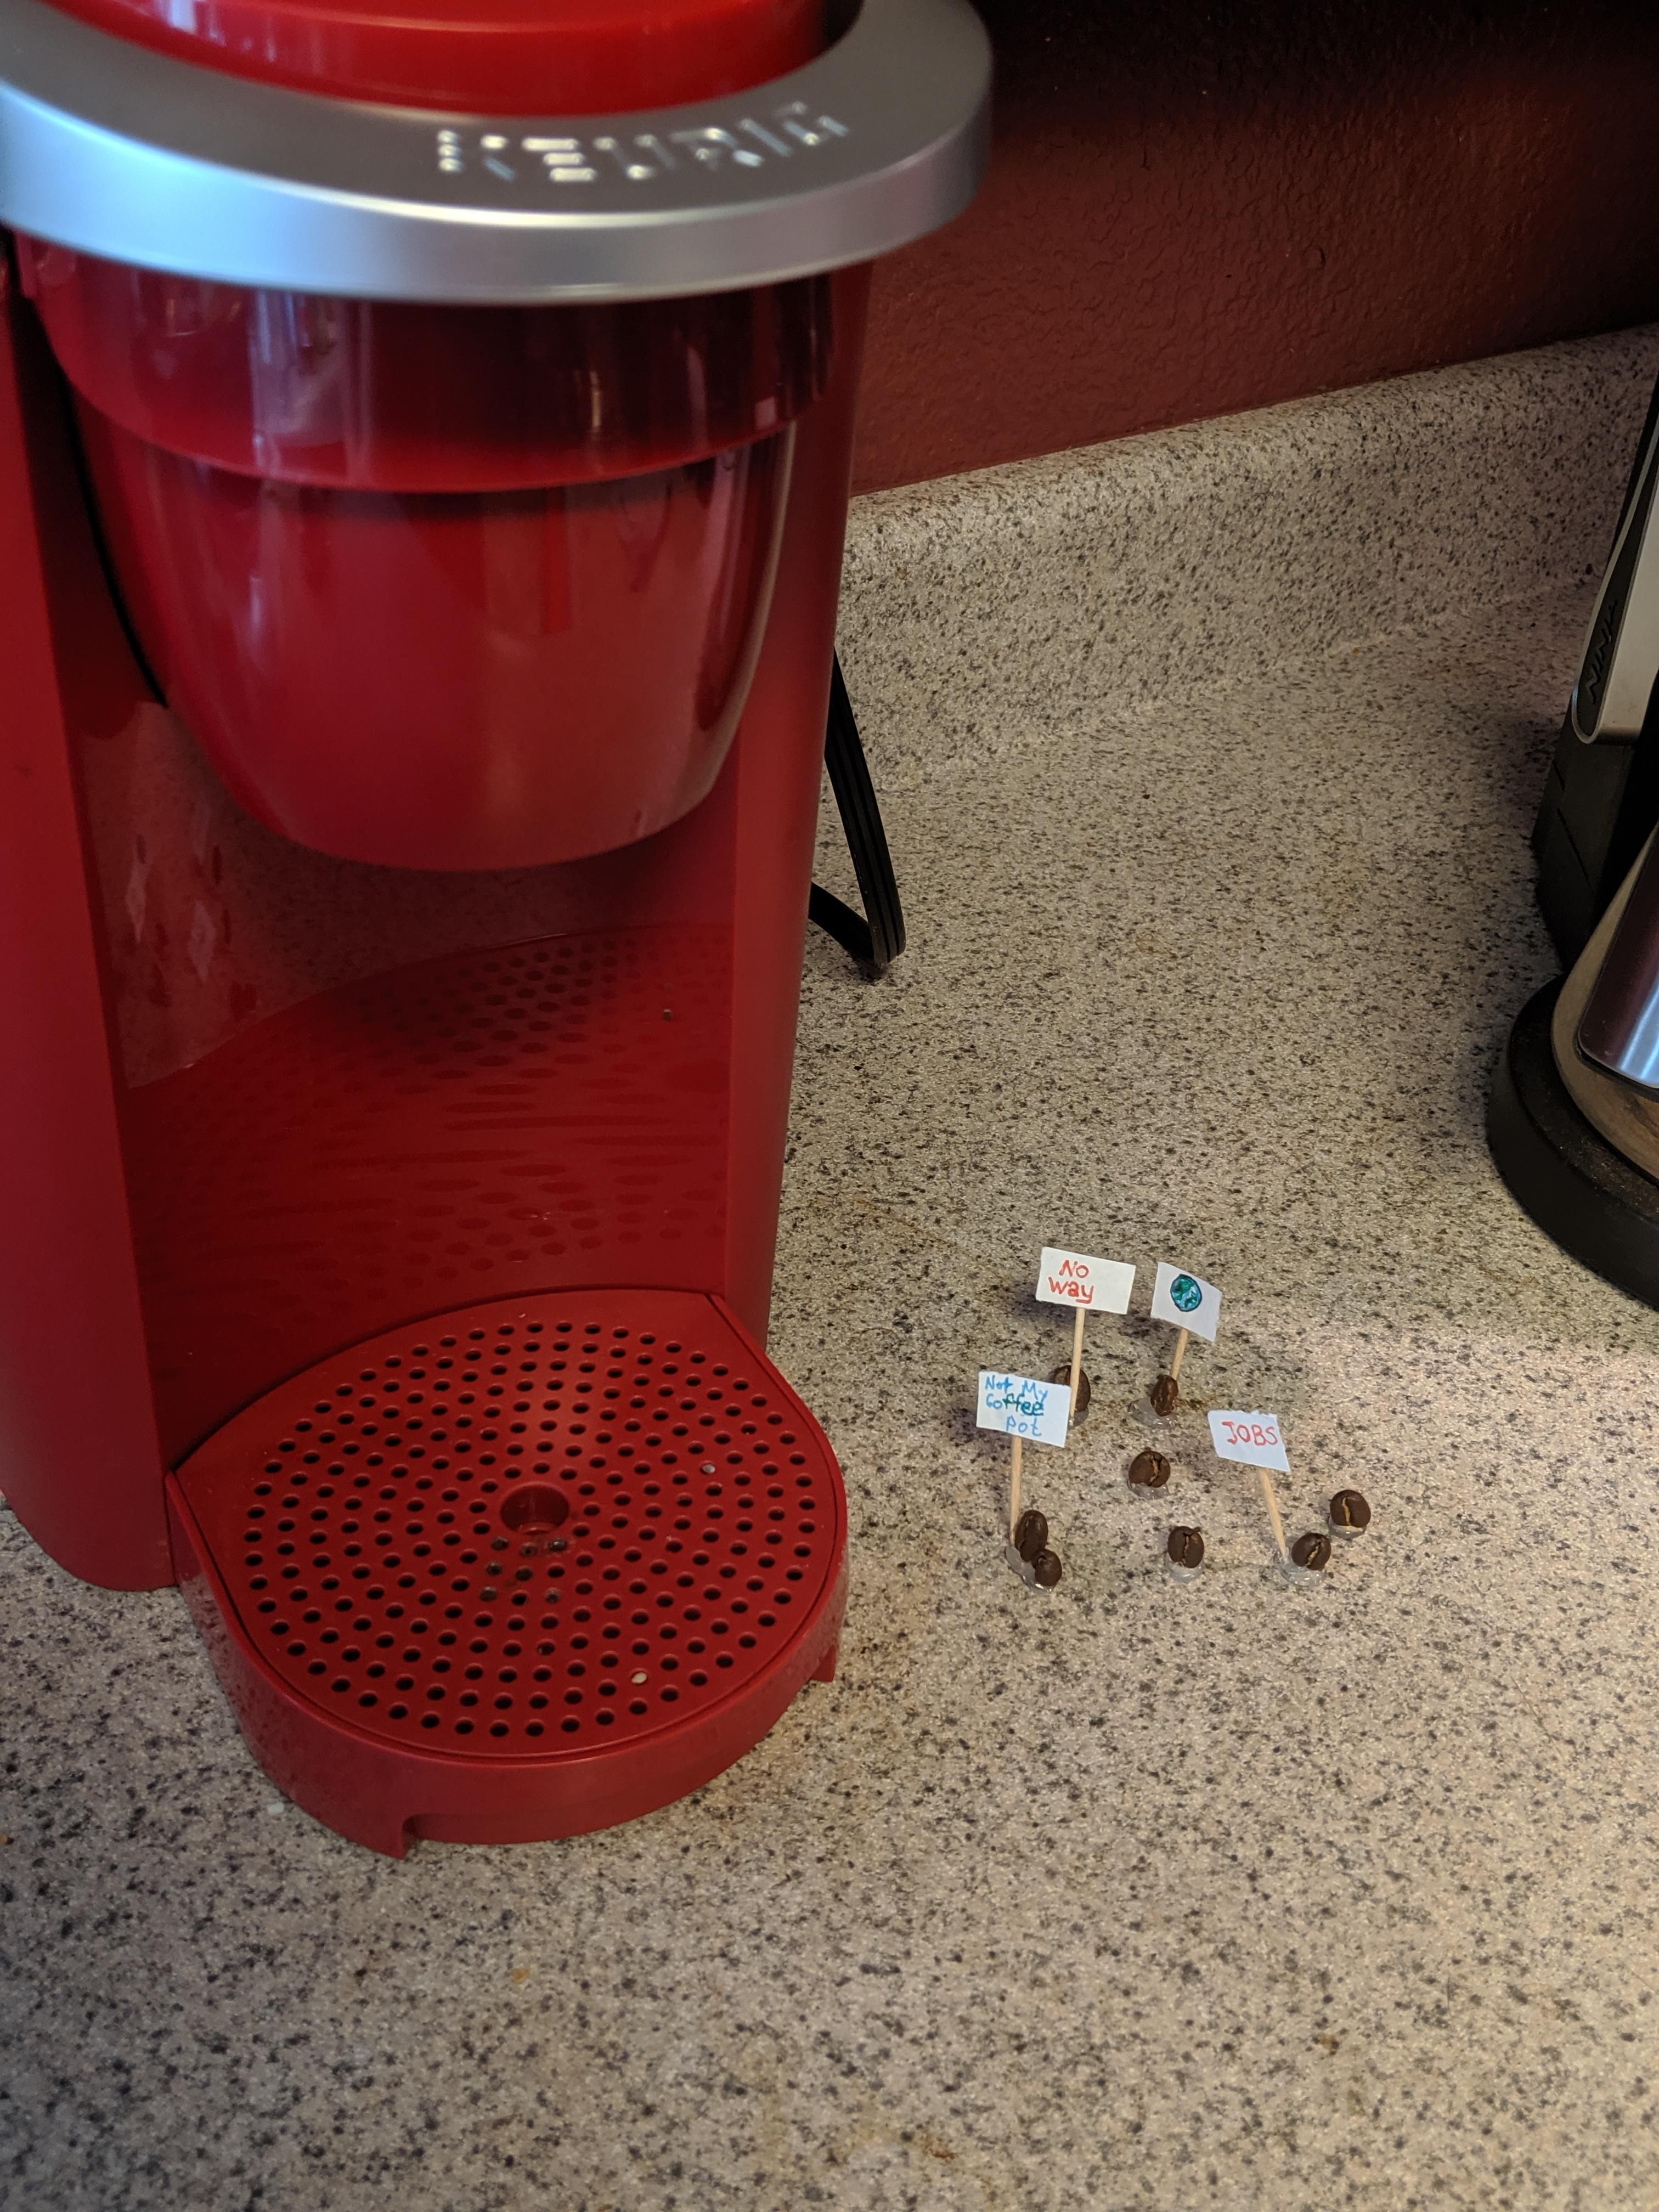 Our roomate bought a Keurig despite us already having a coffee pot. The community was not happy.